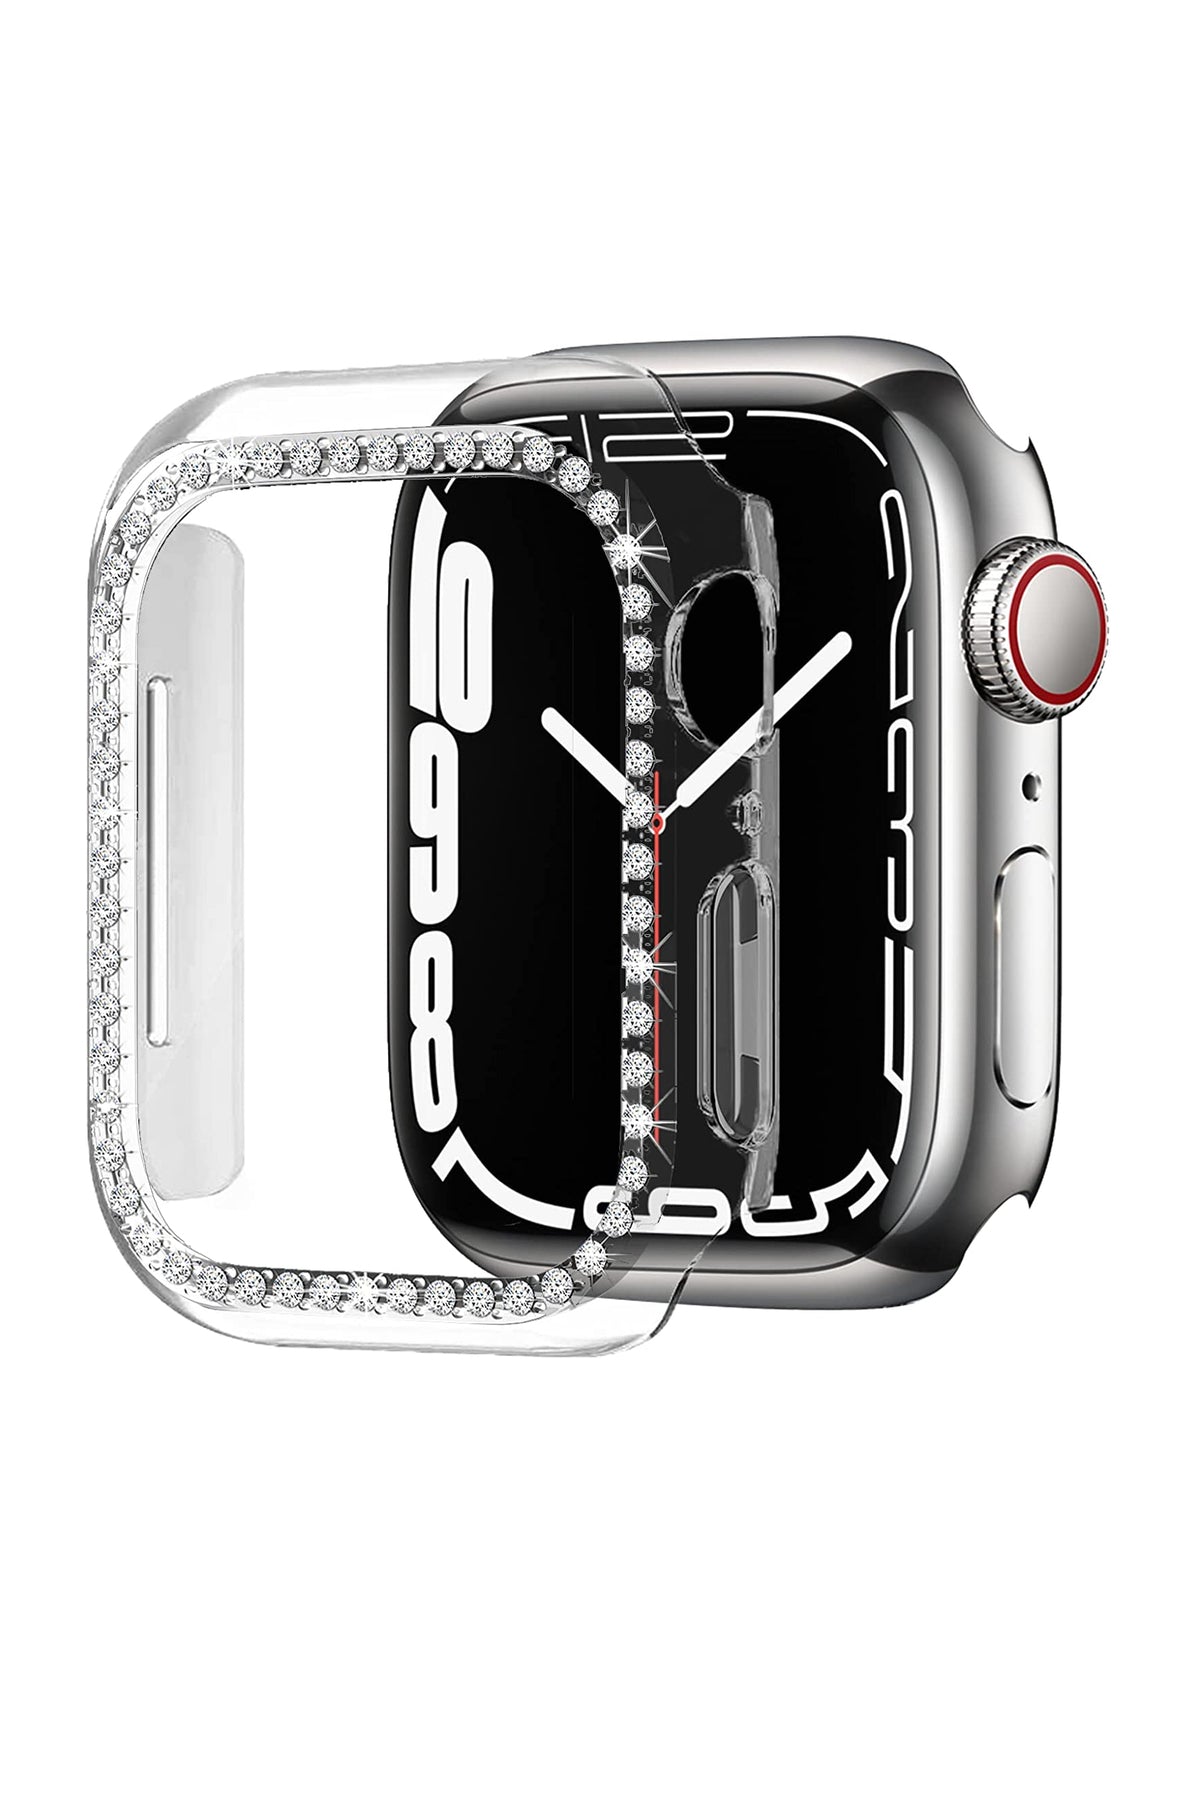 Apple Watch Compatible Bumper Stone Shiny Case Clearity 